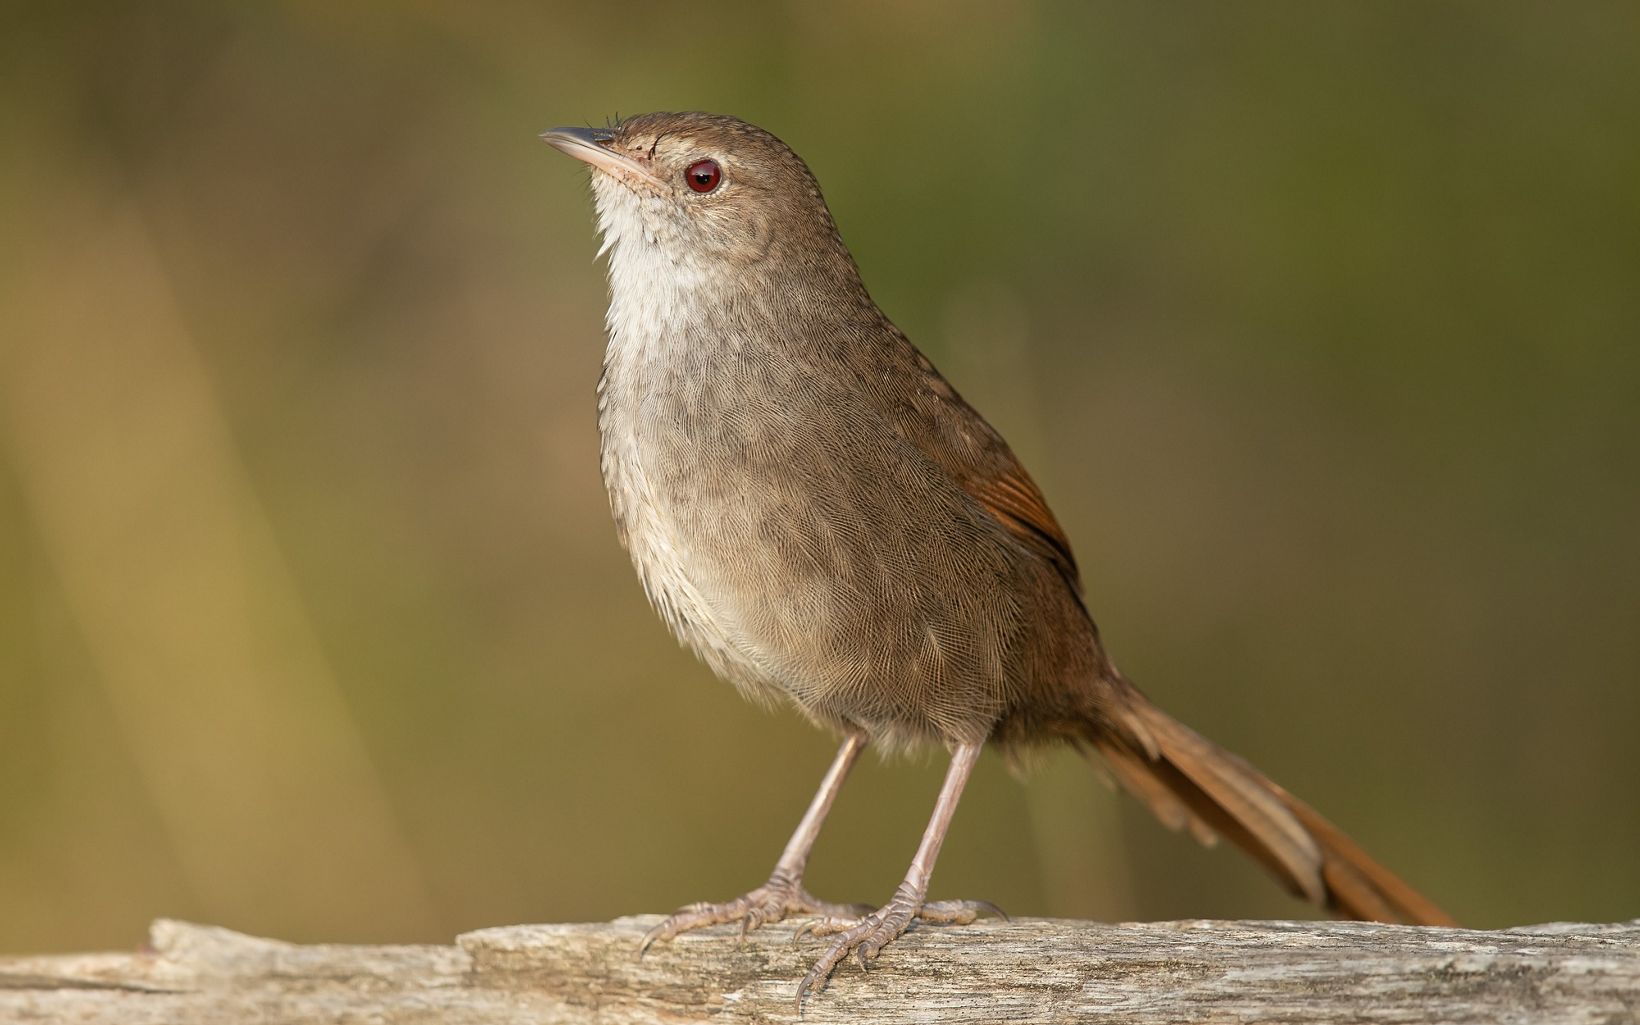 Eastern Bristlebird listed as Endangered, has had much of its habitat destroyed by Australia's disastrous bushfire season in 2019/2020 that burnt 10 million hectares of habitat © J.J. Harrison, Wikimedia Commons